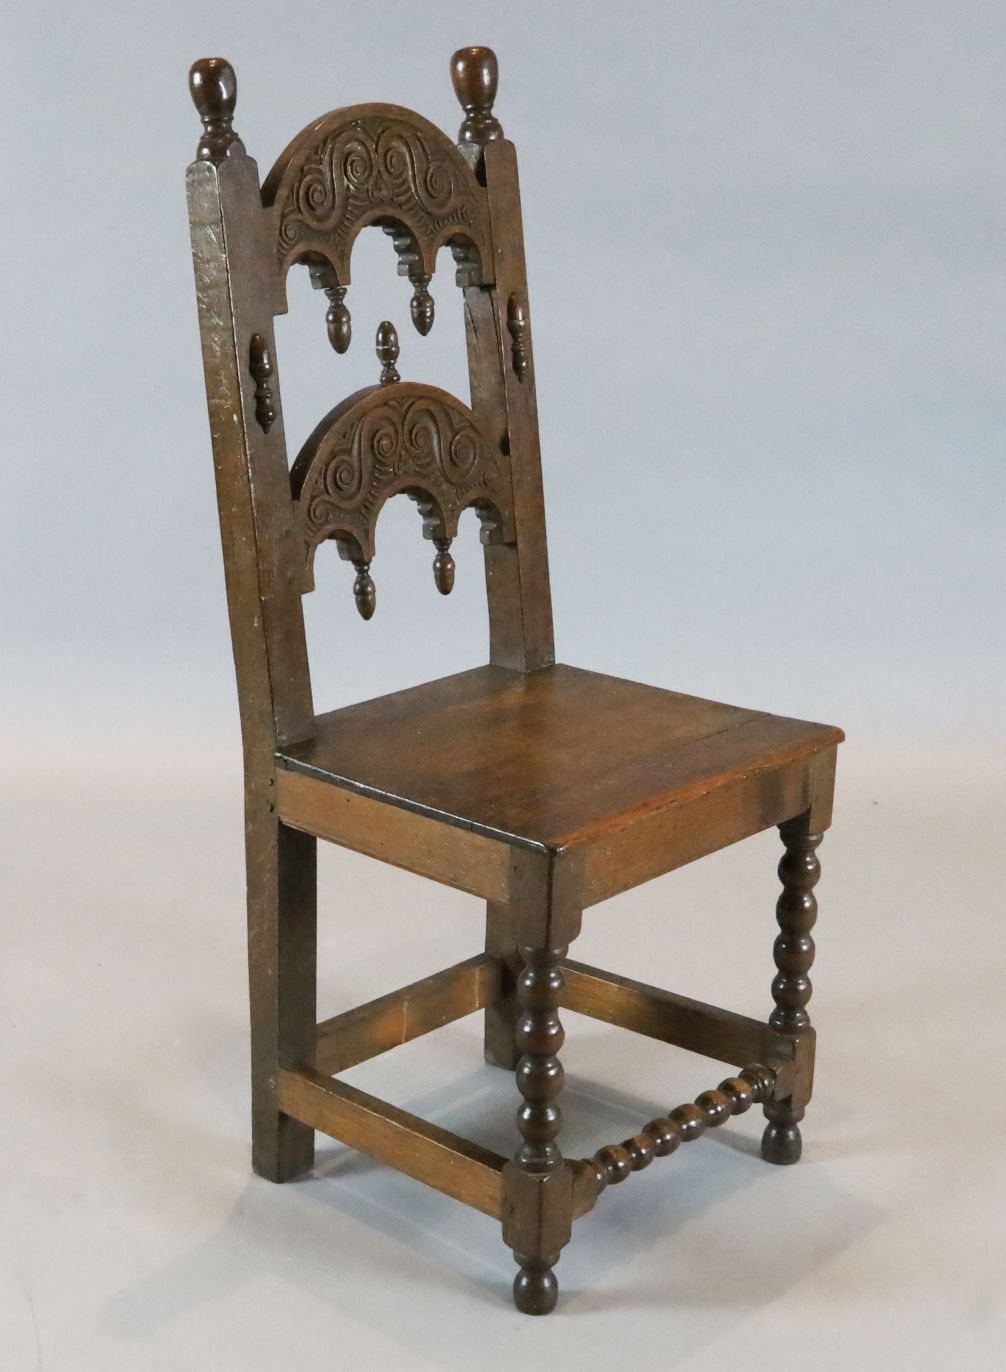 A 17th century Derbyshire oak side chair, with carved and turned arched back and solid seat on